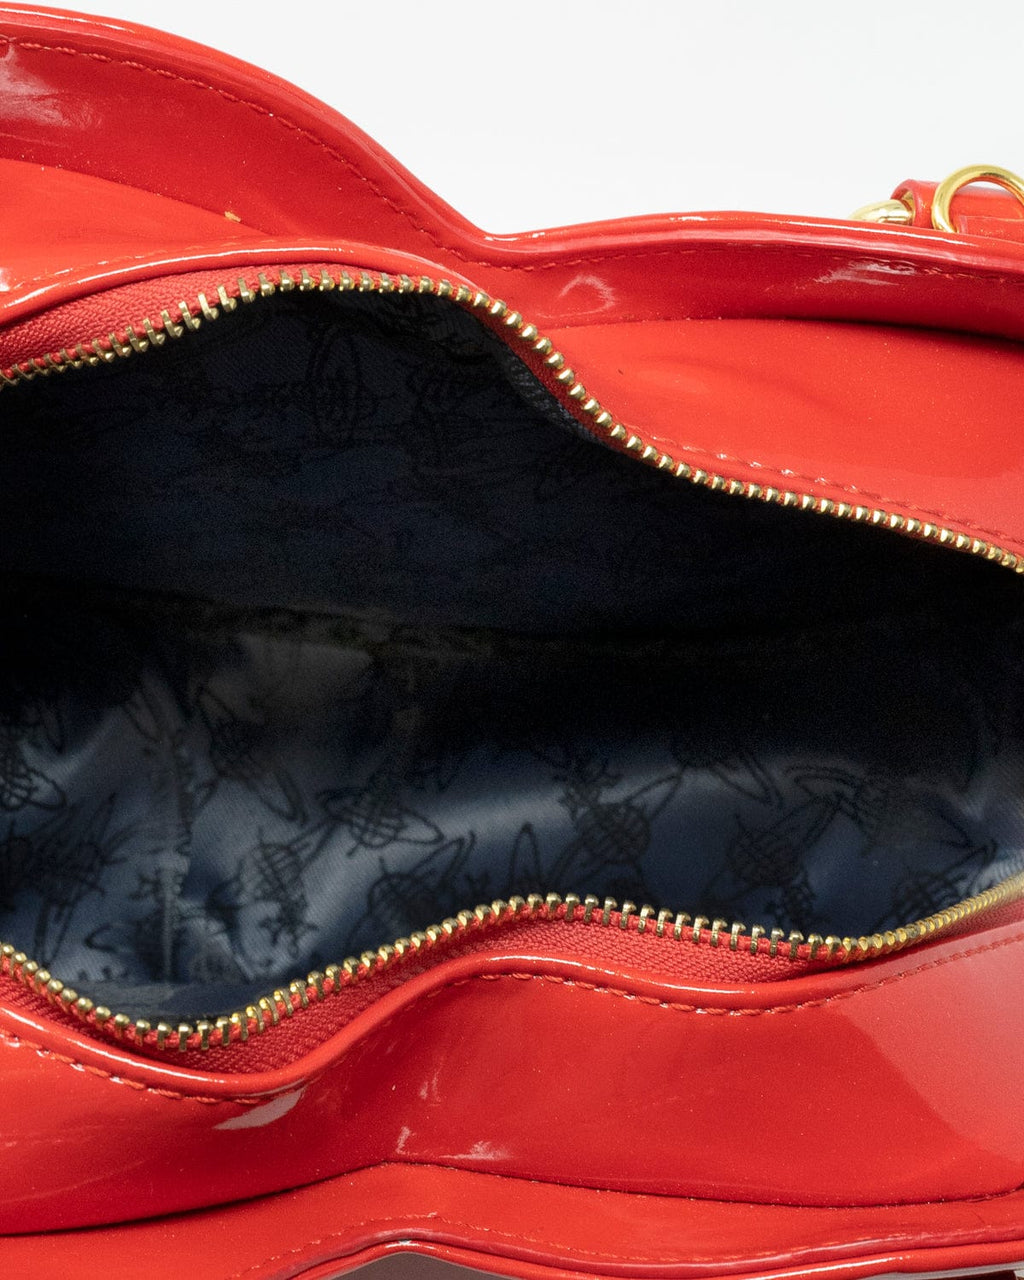 Vivienne Westwood - Authenticated Clutch Bag - Patent Leather Red Plain for Women, Very Good Condition